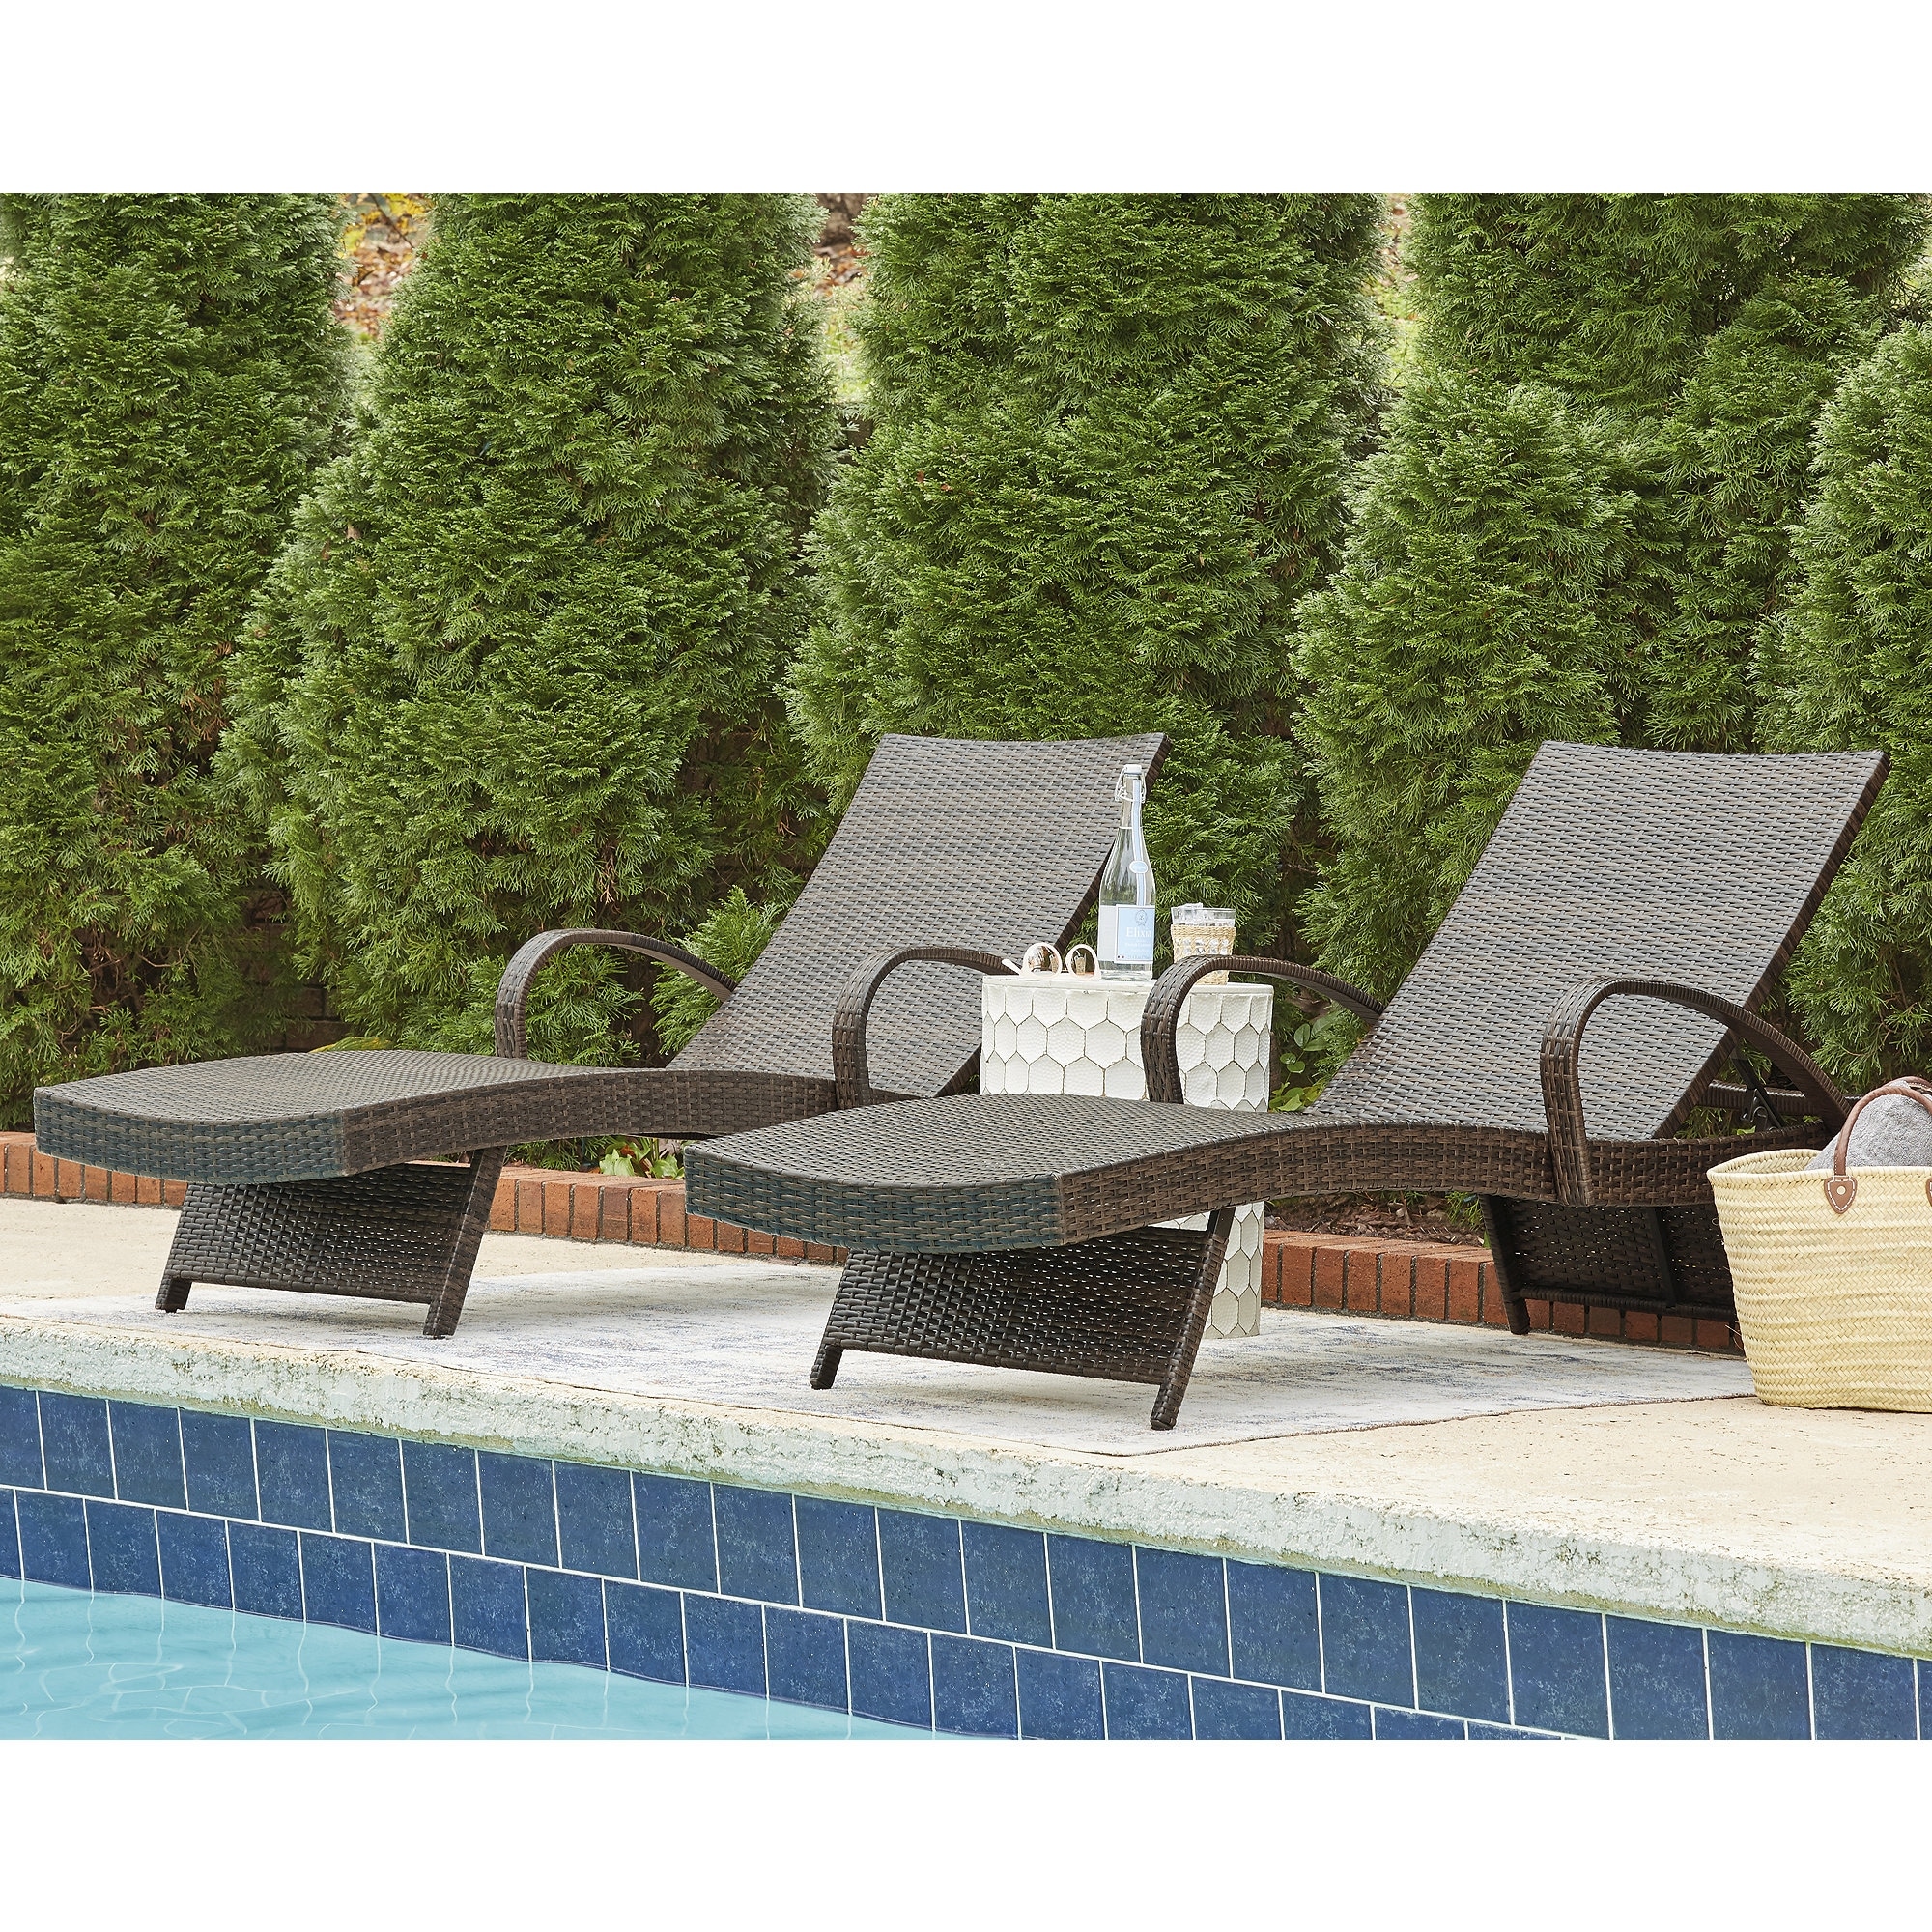 Kantana Brown Outdoor Chaise Lounge, Set Of 2 24"w X 80"d X 16"h